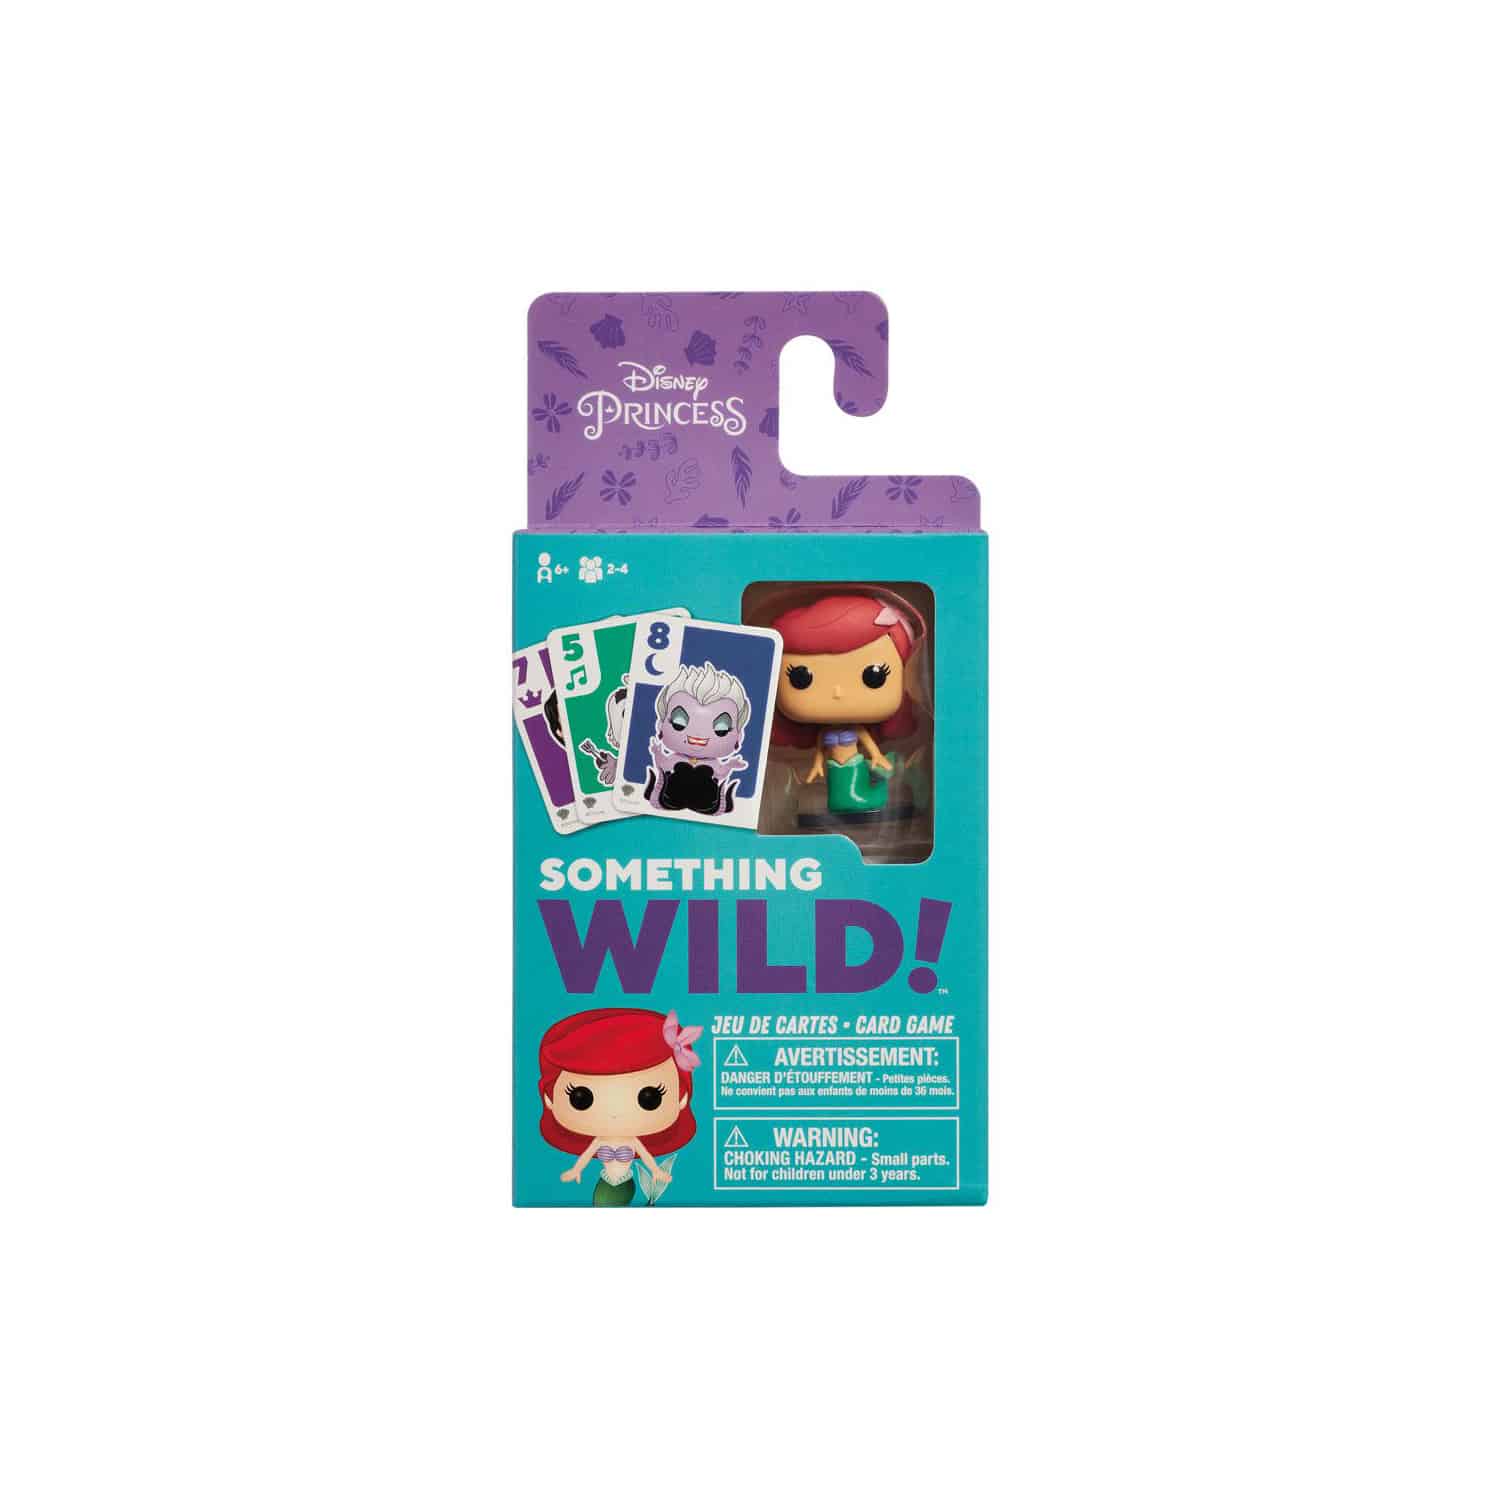 Something Wild! The Little Mermaid Card Game